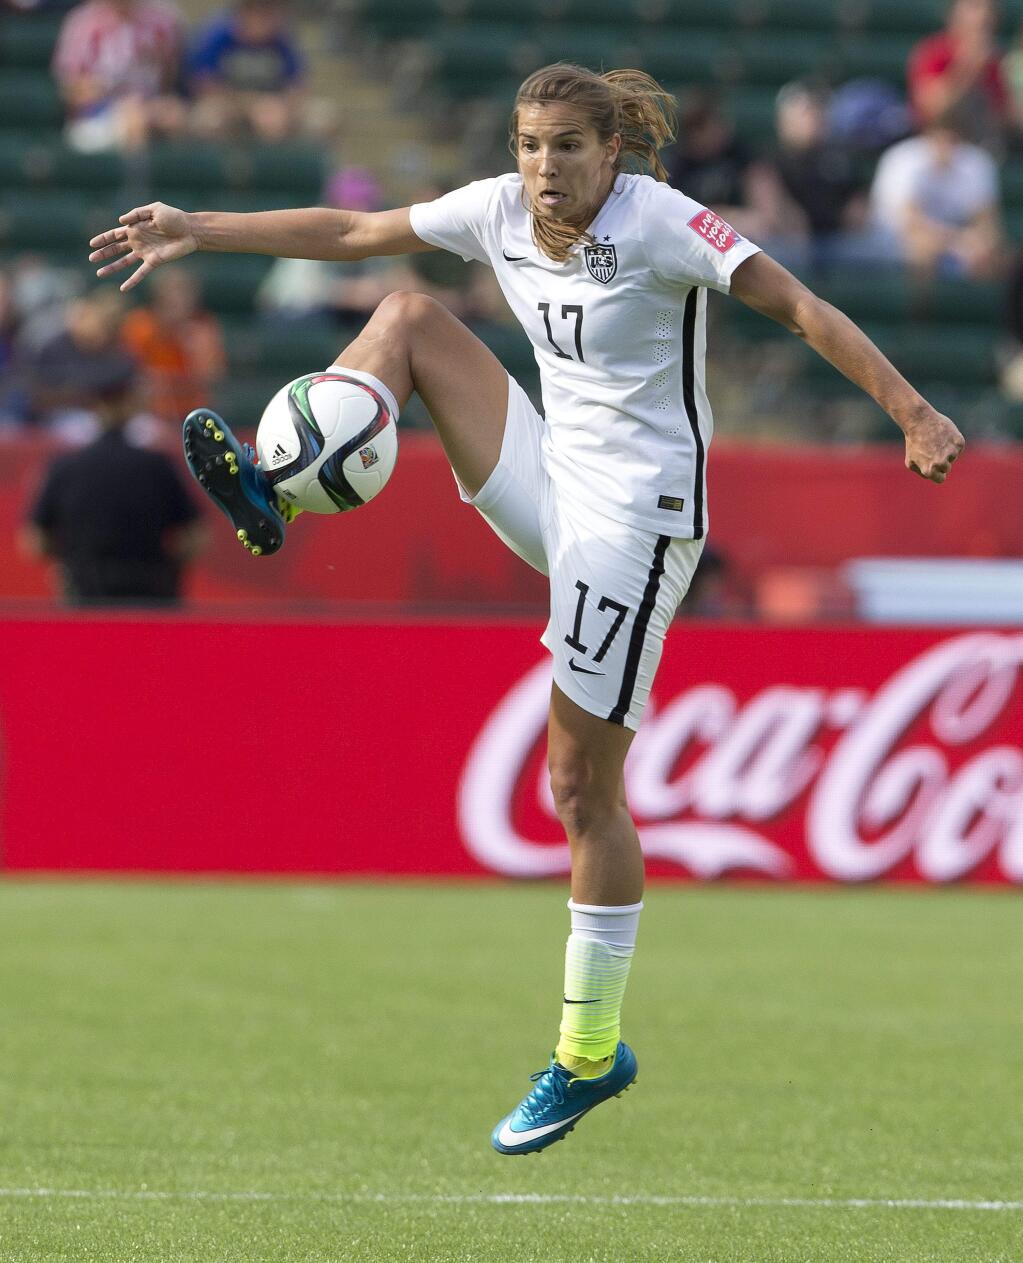 United States' Tobin Heath (17) kicks the ball against Colombia during first half FIFA Women's World Cup round of 16 action in Edmonton, Alberta, Canada, Monday, June 22, 2015. (Jason Franson/The Canadian Press via AP)